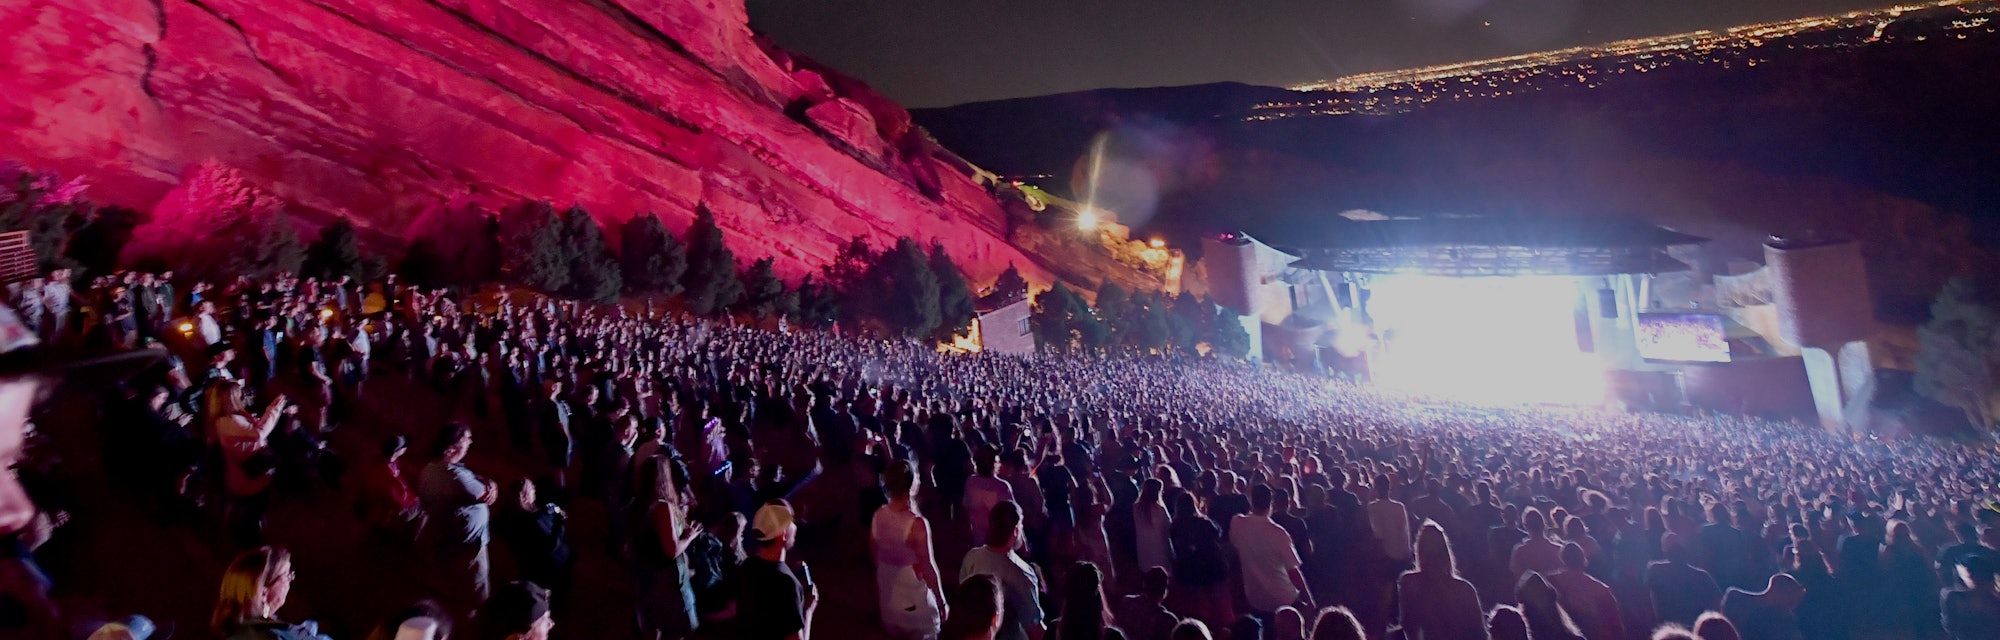 MORRISON, CO - JUNE 19:  Umphrey's McGee perform at Red Rocks Amphitheater on June 19, 2021 in Morri...